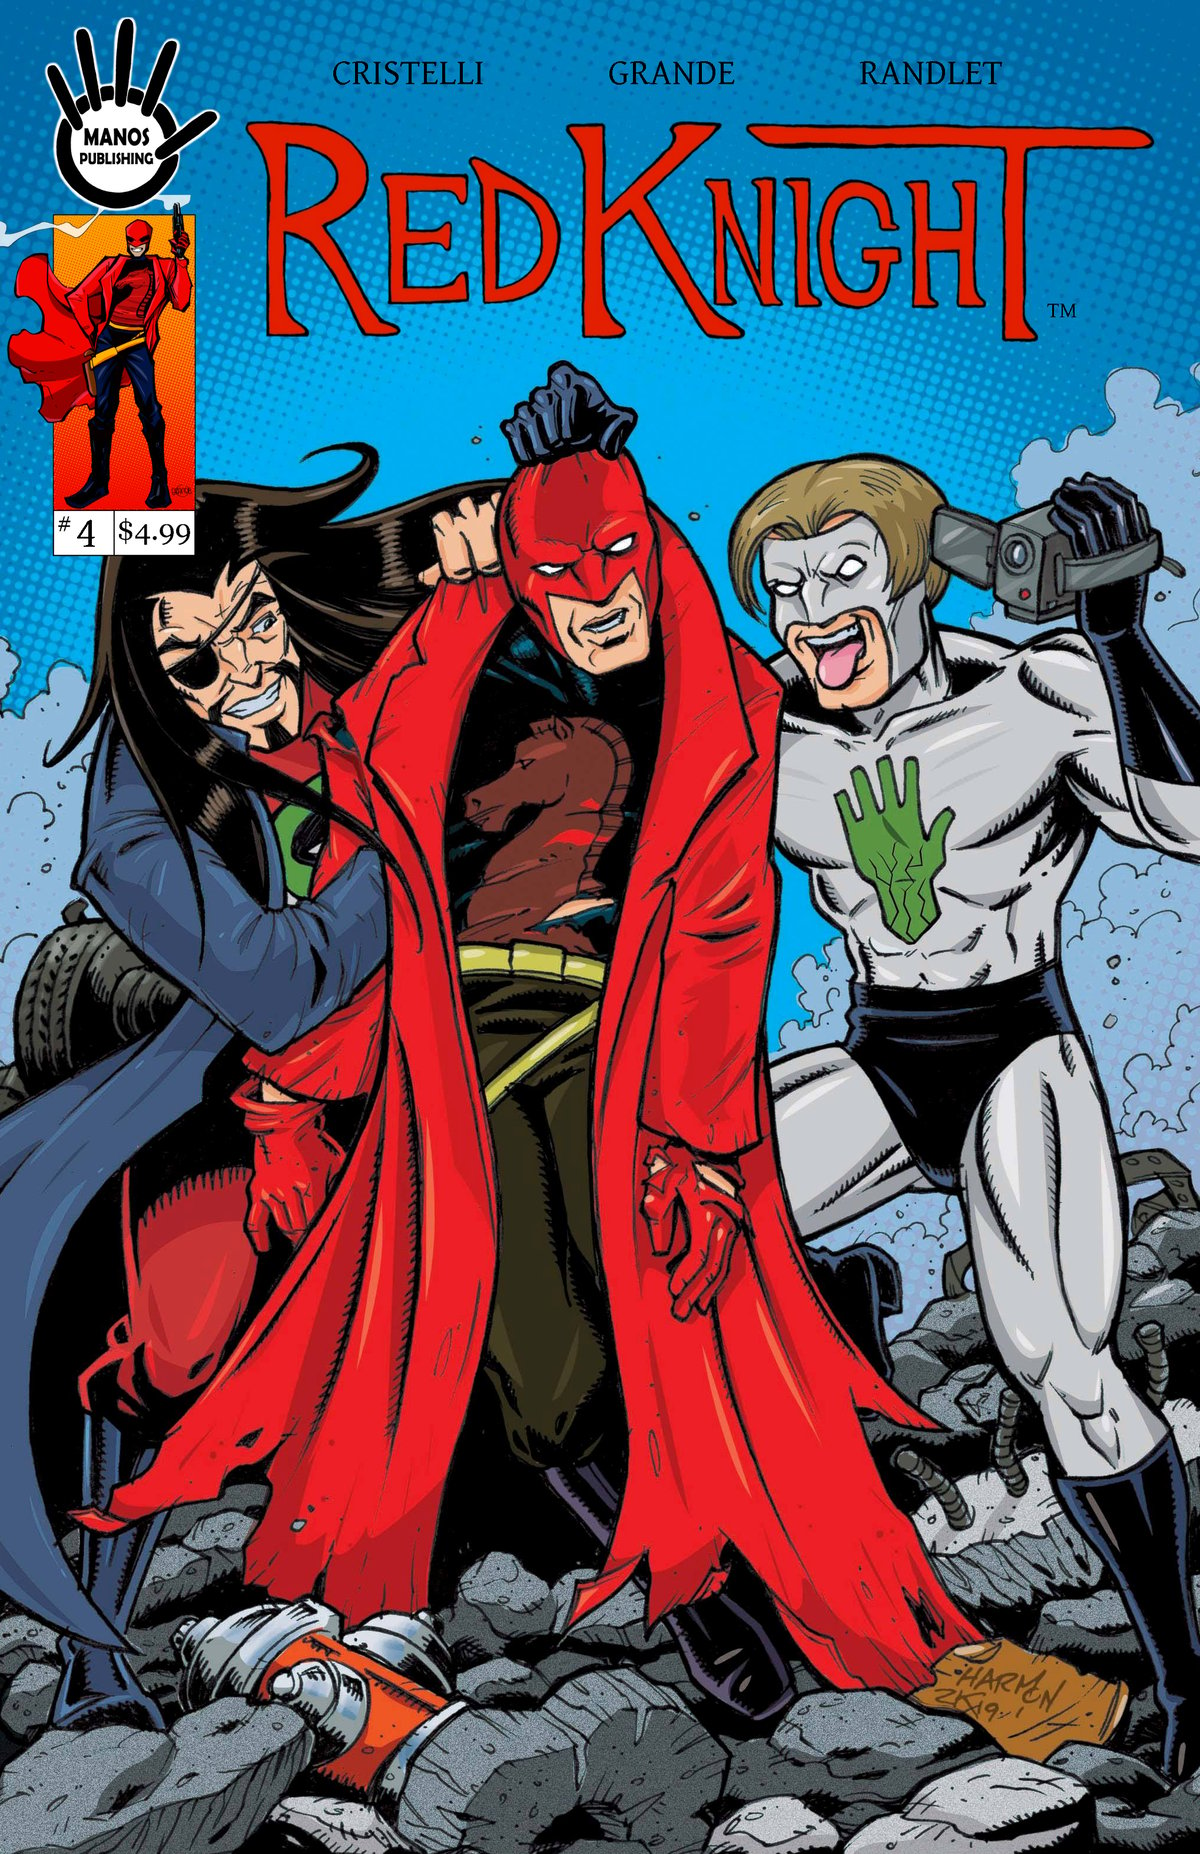 Image of Red Knight #4